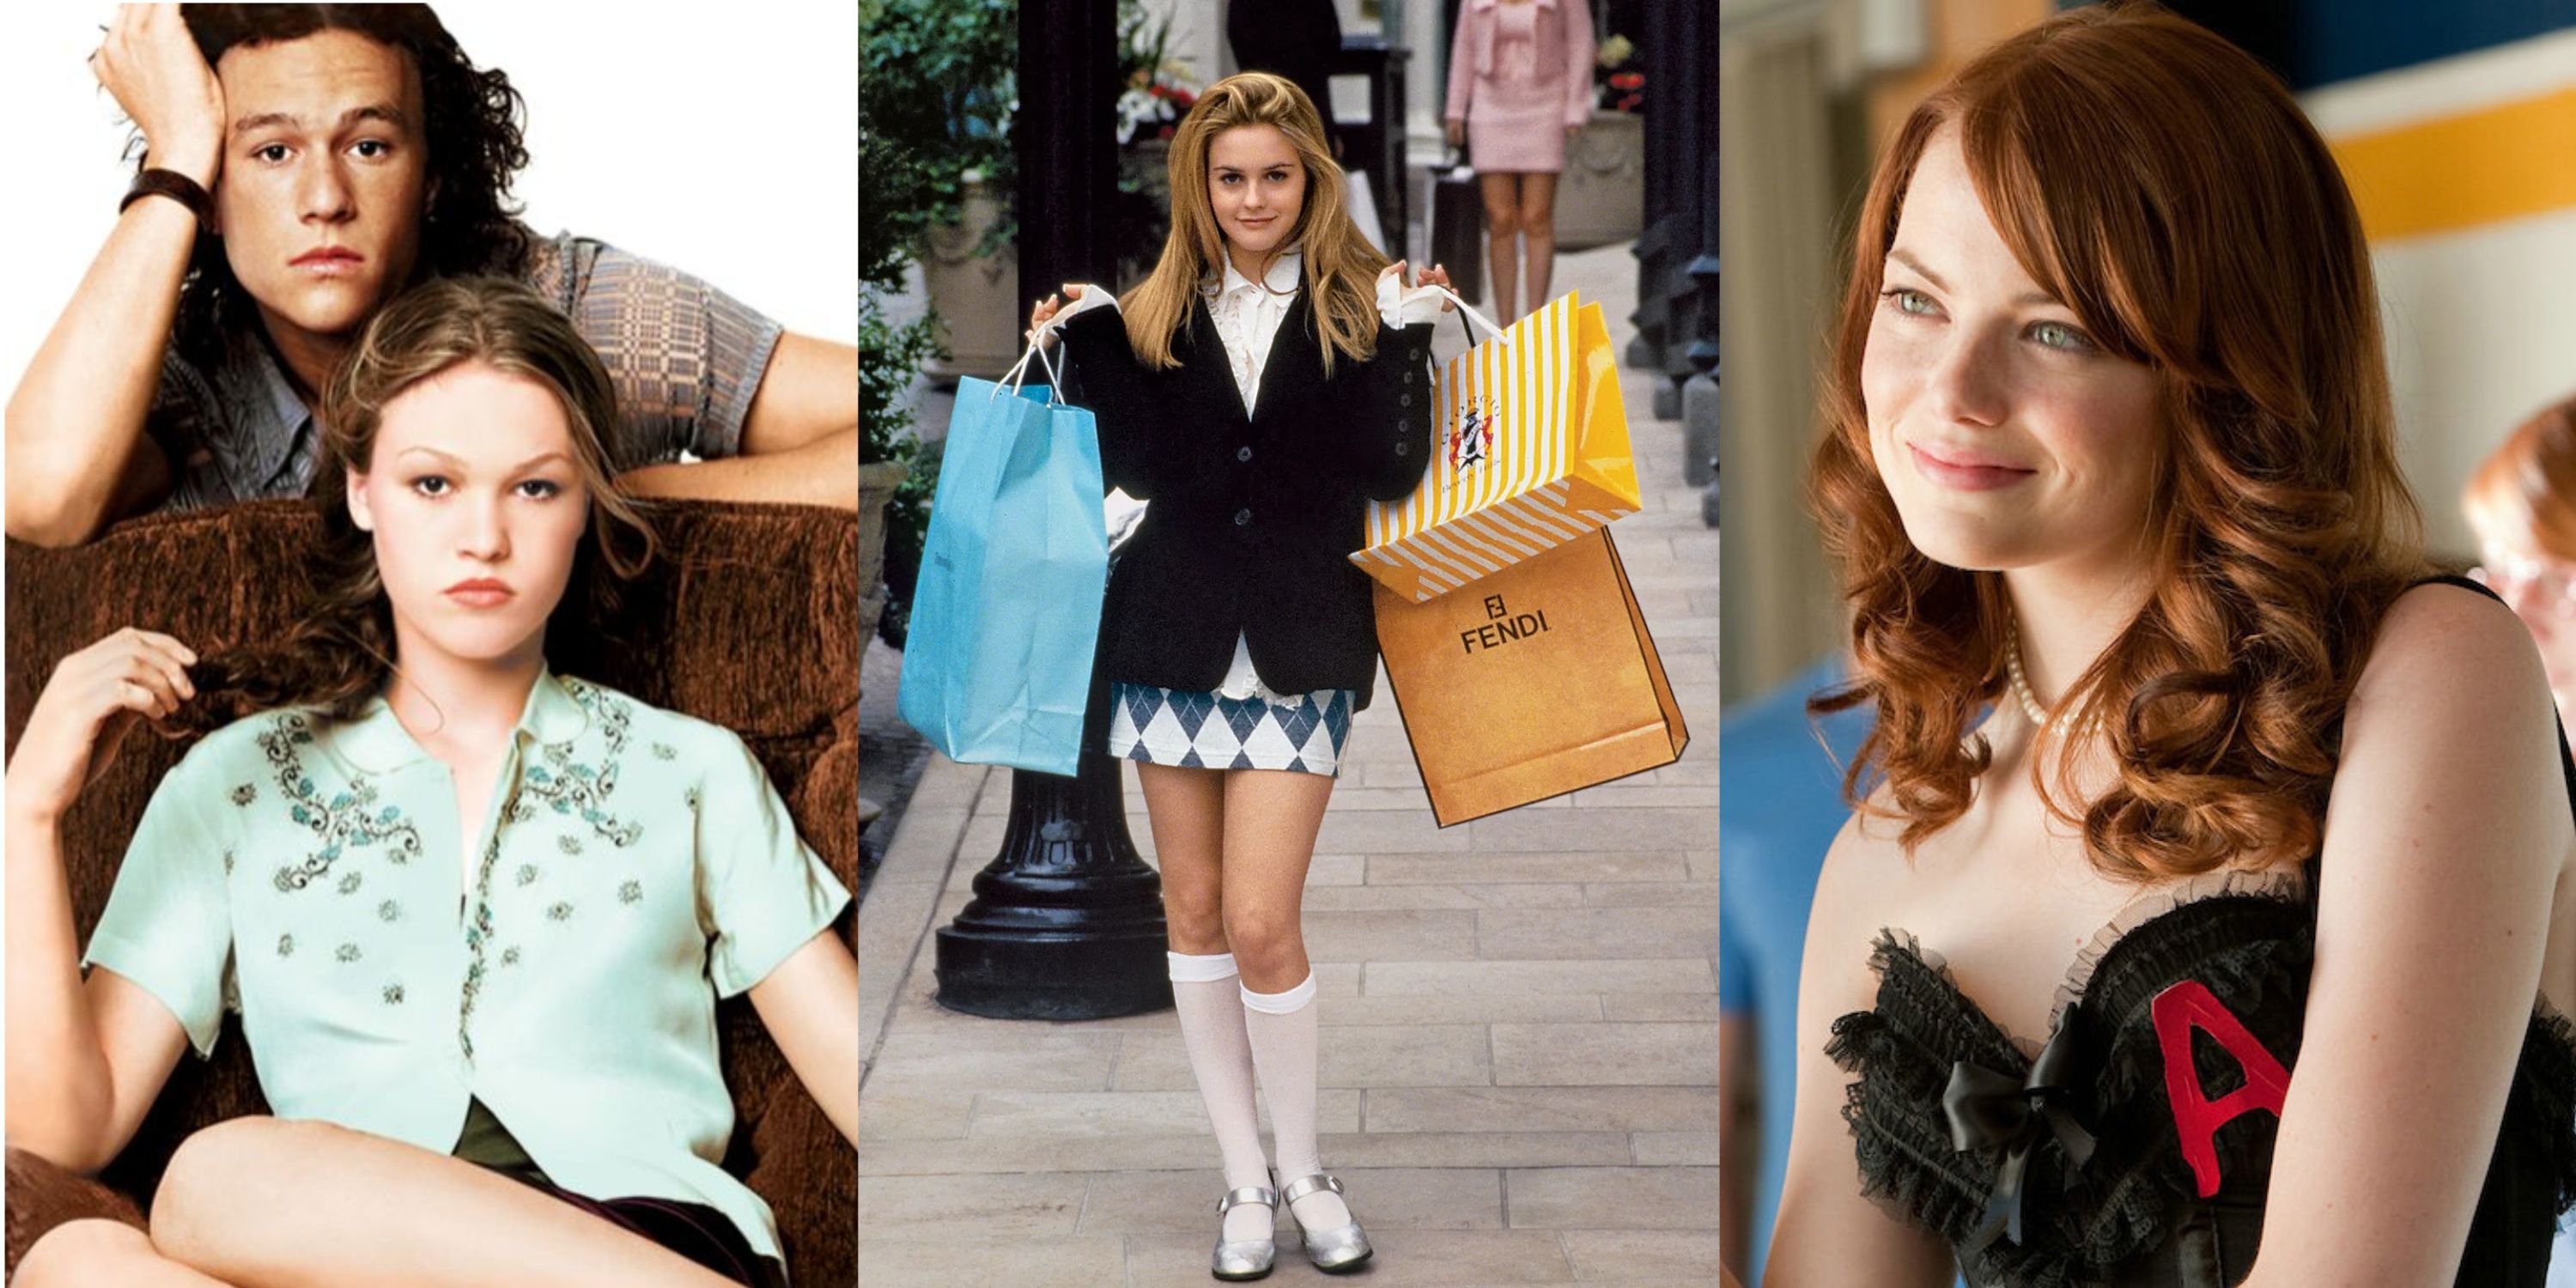 Kat and Patrick in 10 things I Hate About You, Cher in Clueless, and Olive in Easy A.